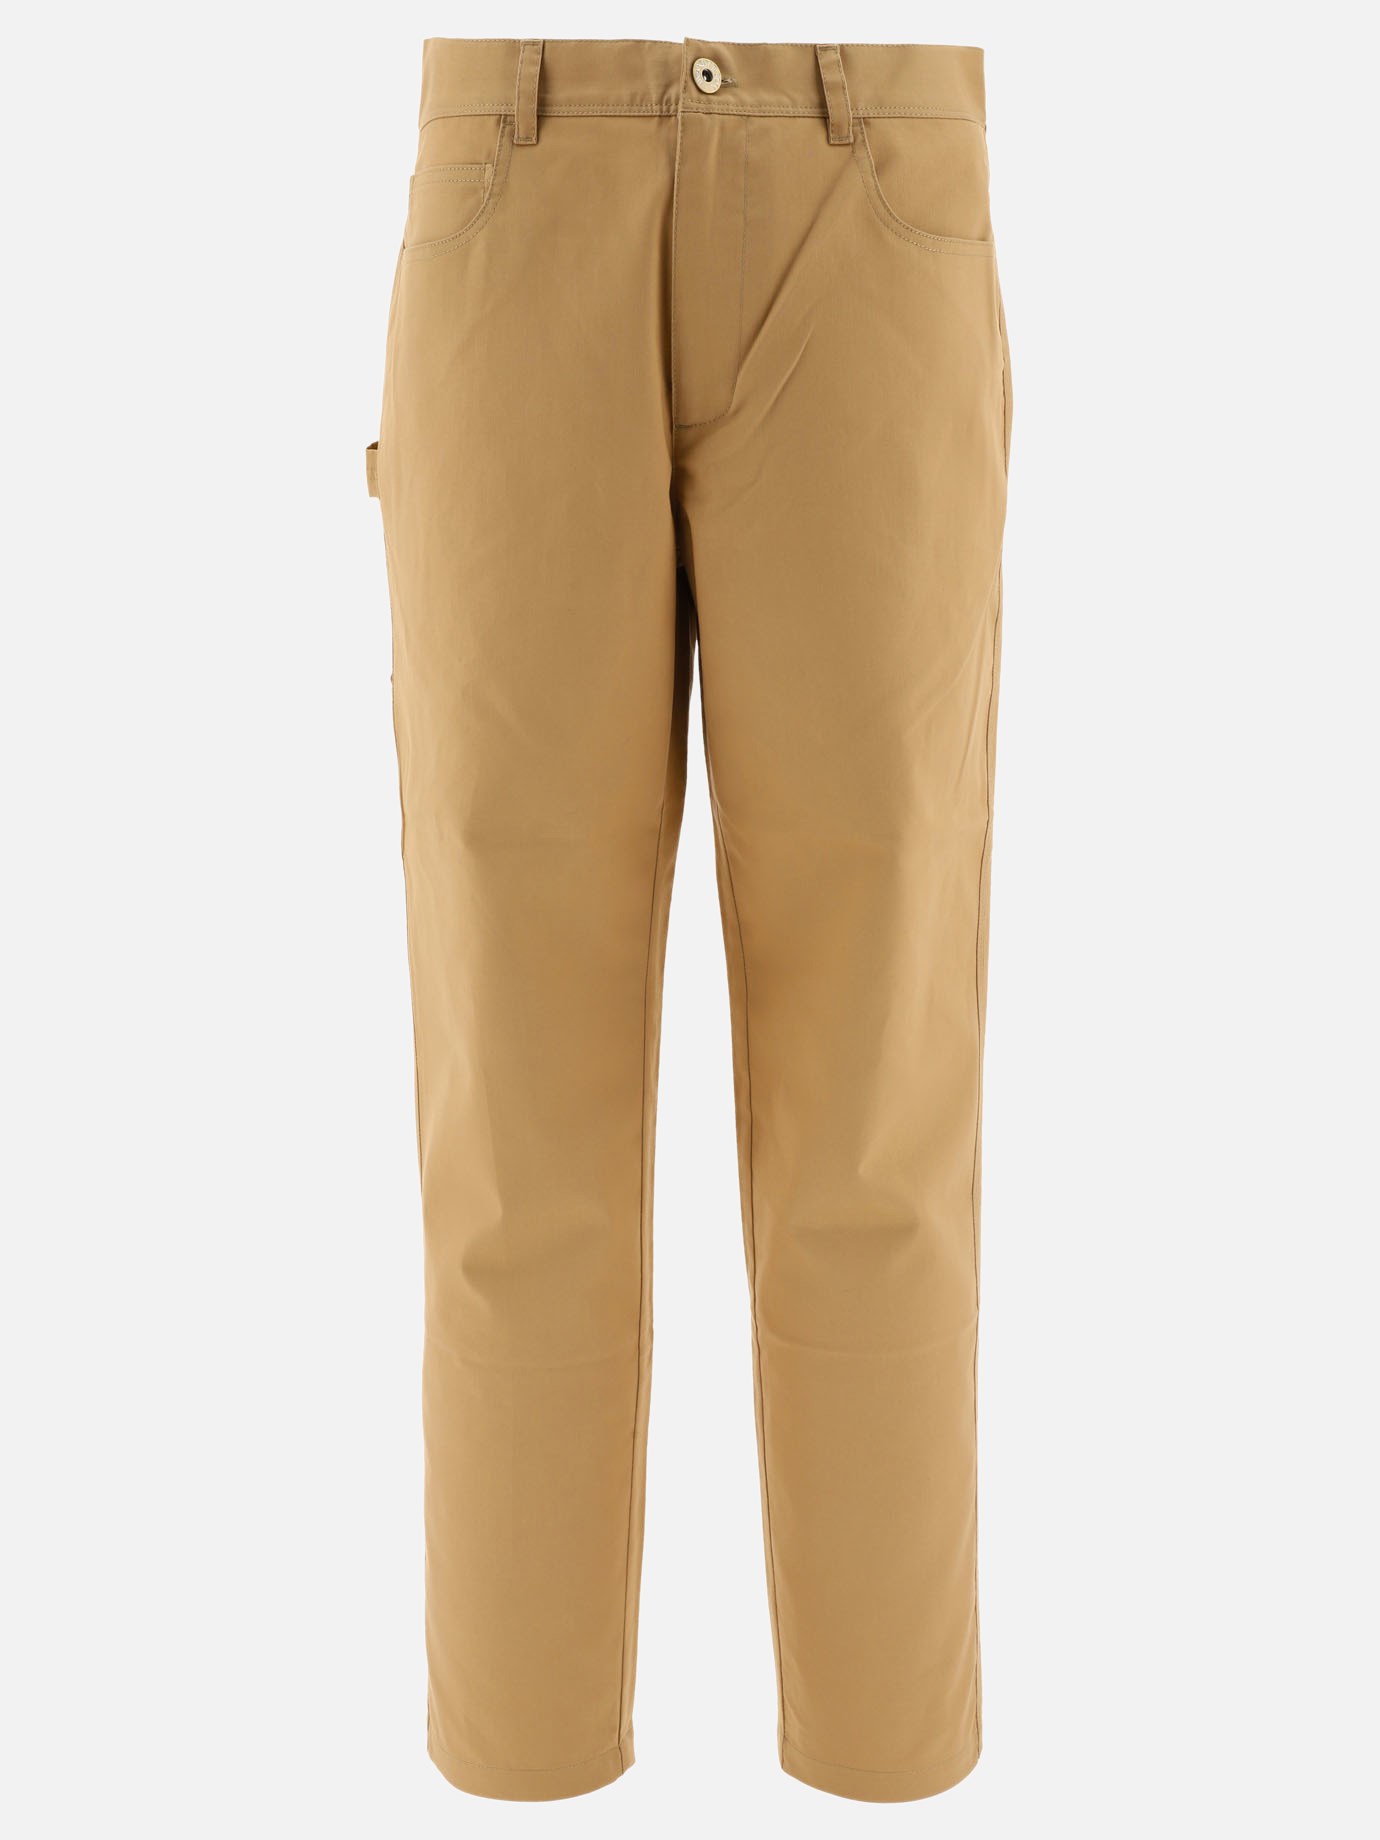  Workwear  chino trousersby JW Anderson - 3